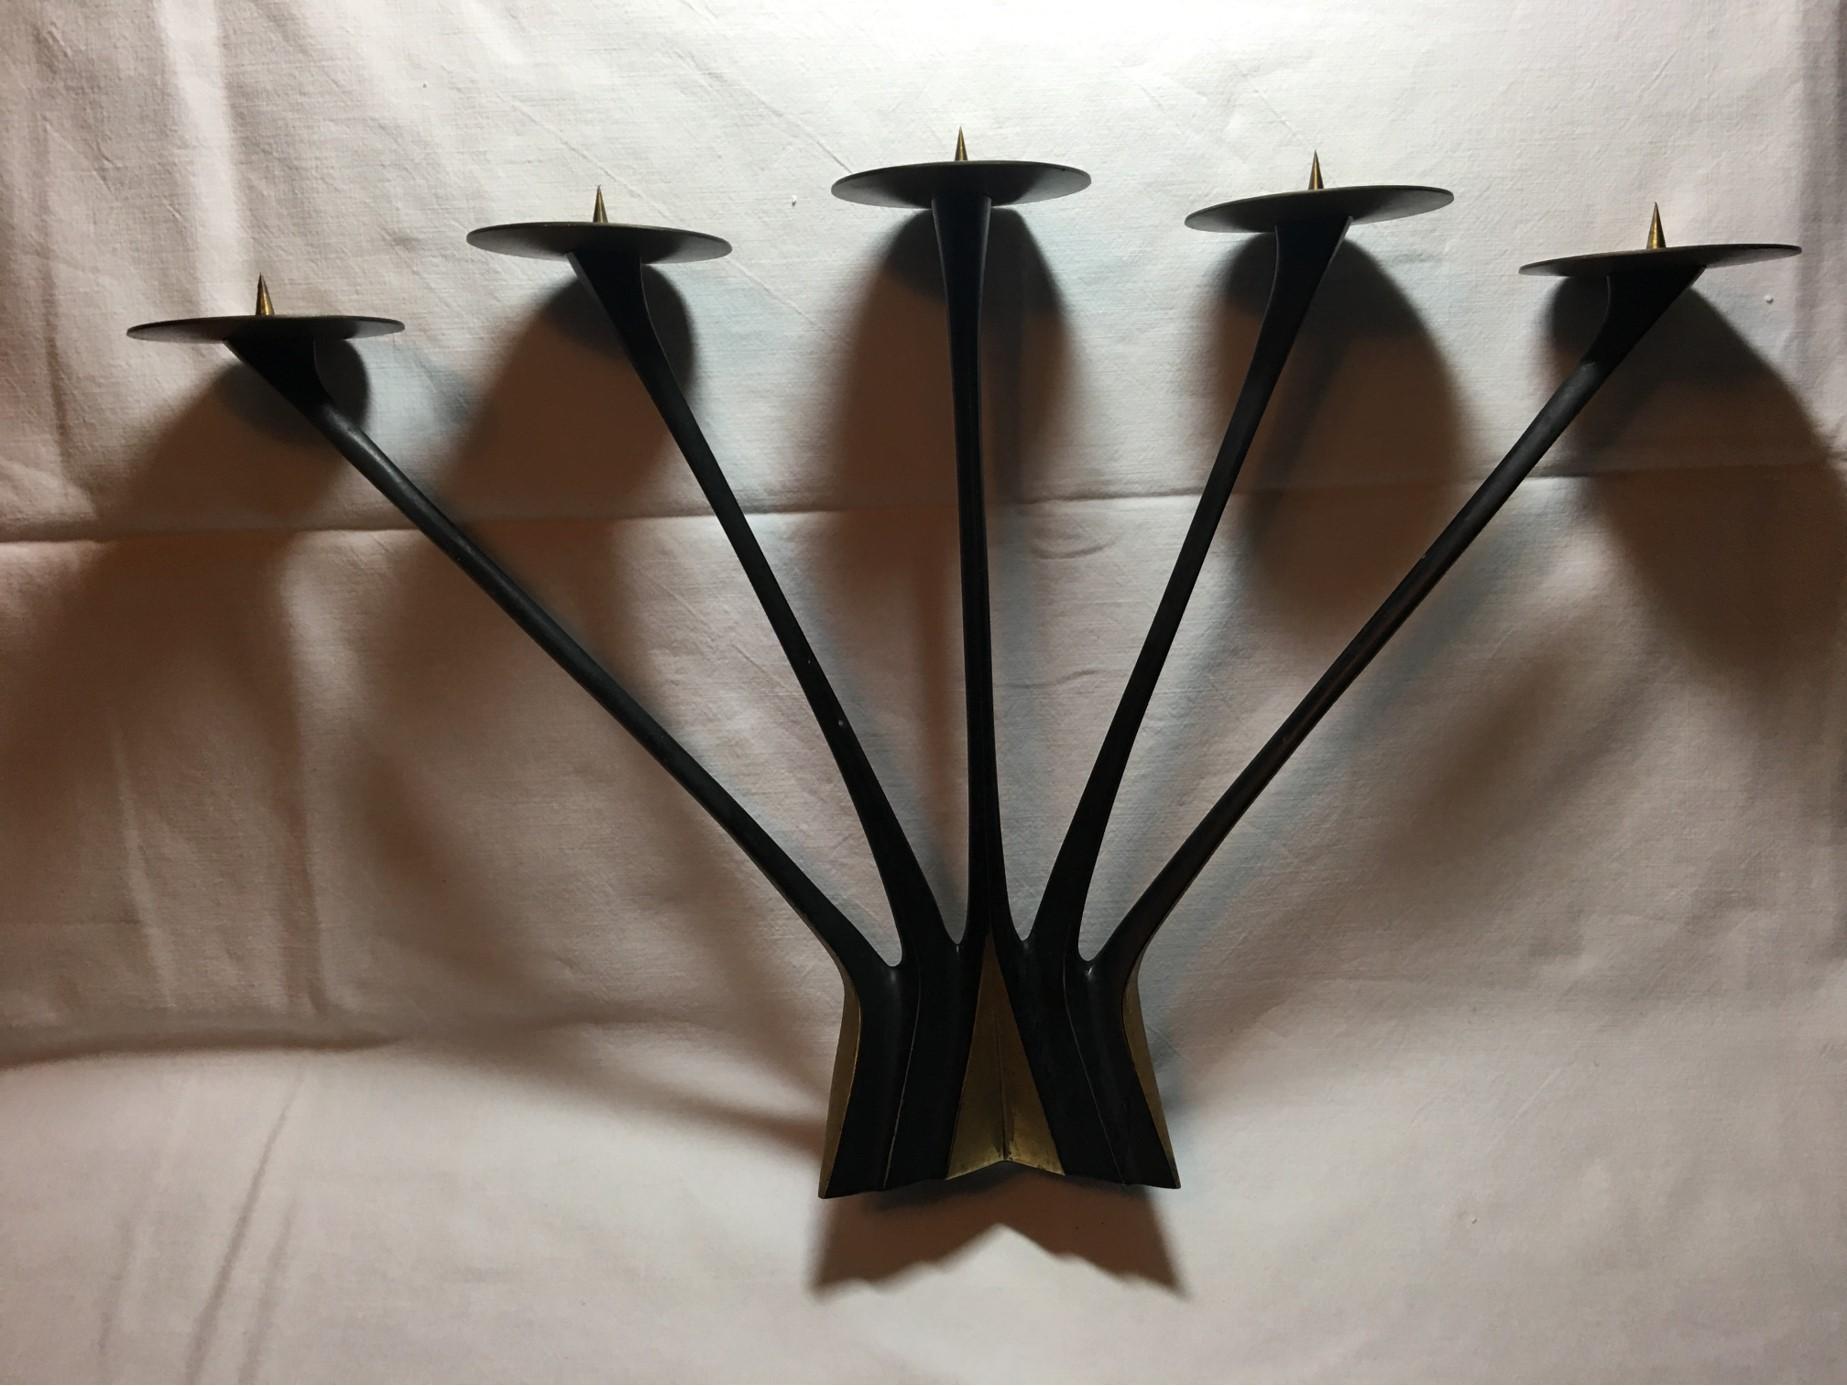 Lovely, majestic five-armed candleholder designed by Klaus Ullrich for Faber & Schumacher in the 1950s. It is made from solid metal in beautiful tones of black and brass. This German candleholder is a lovely addition to any home.